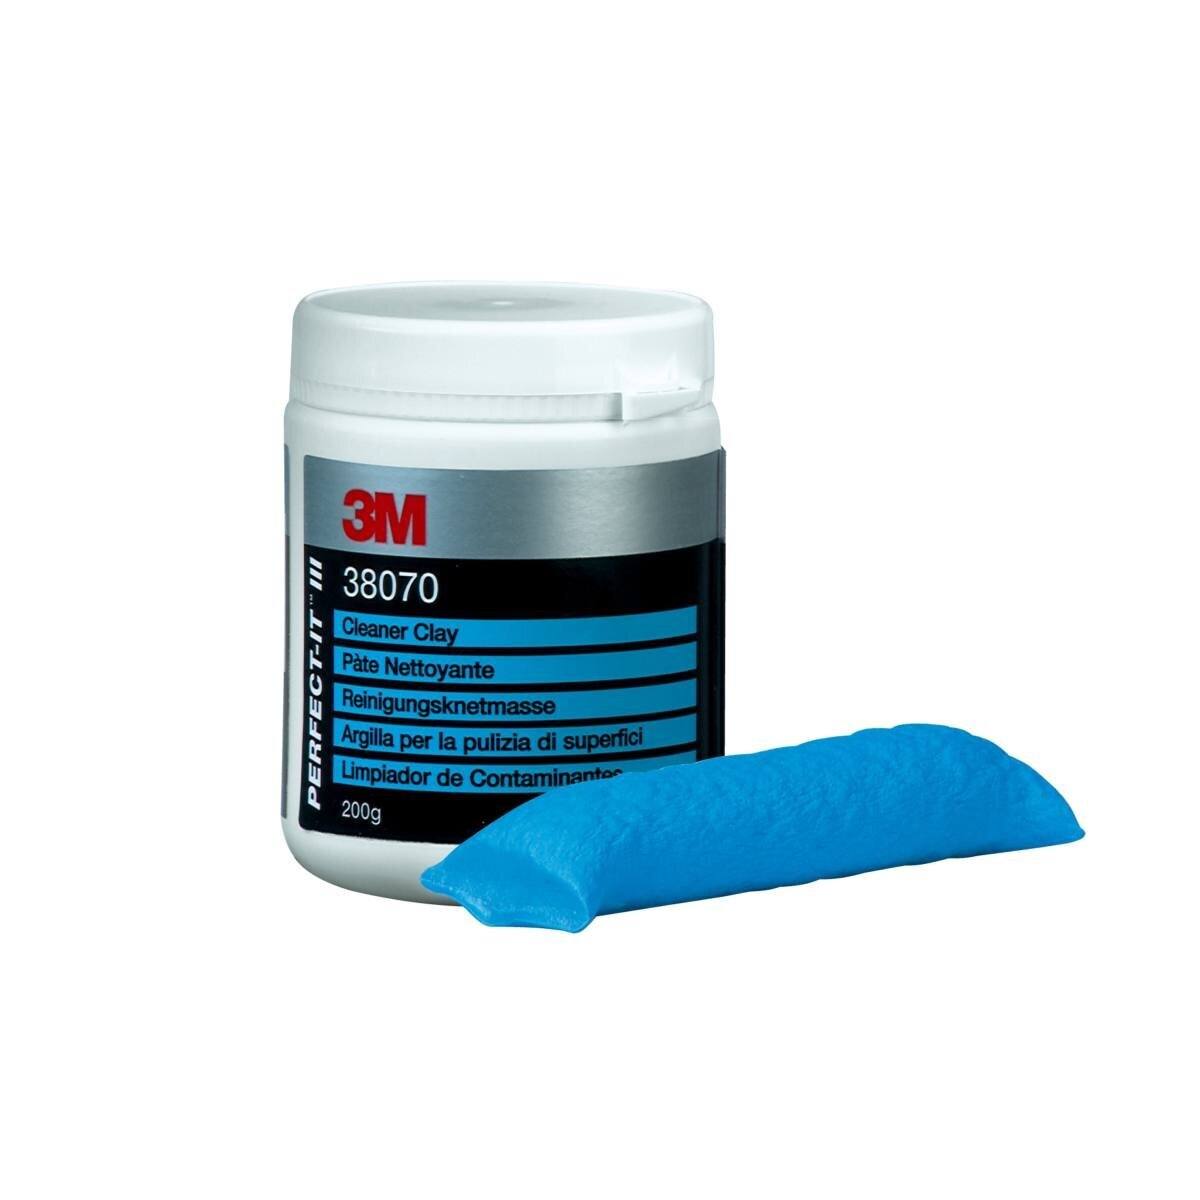 3M Perfect-It III Cleaning putty, blue, 200 g #38070